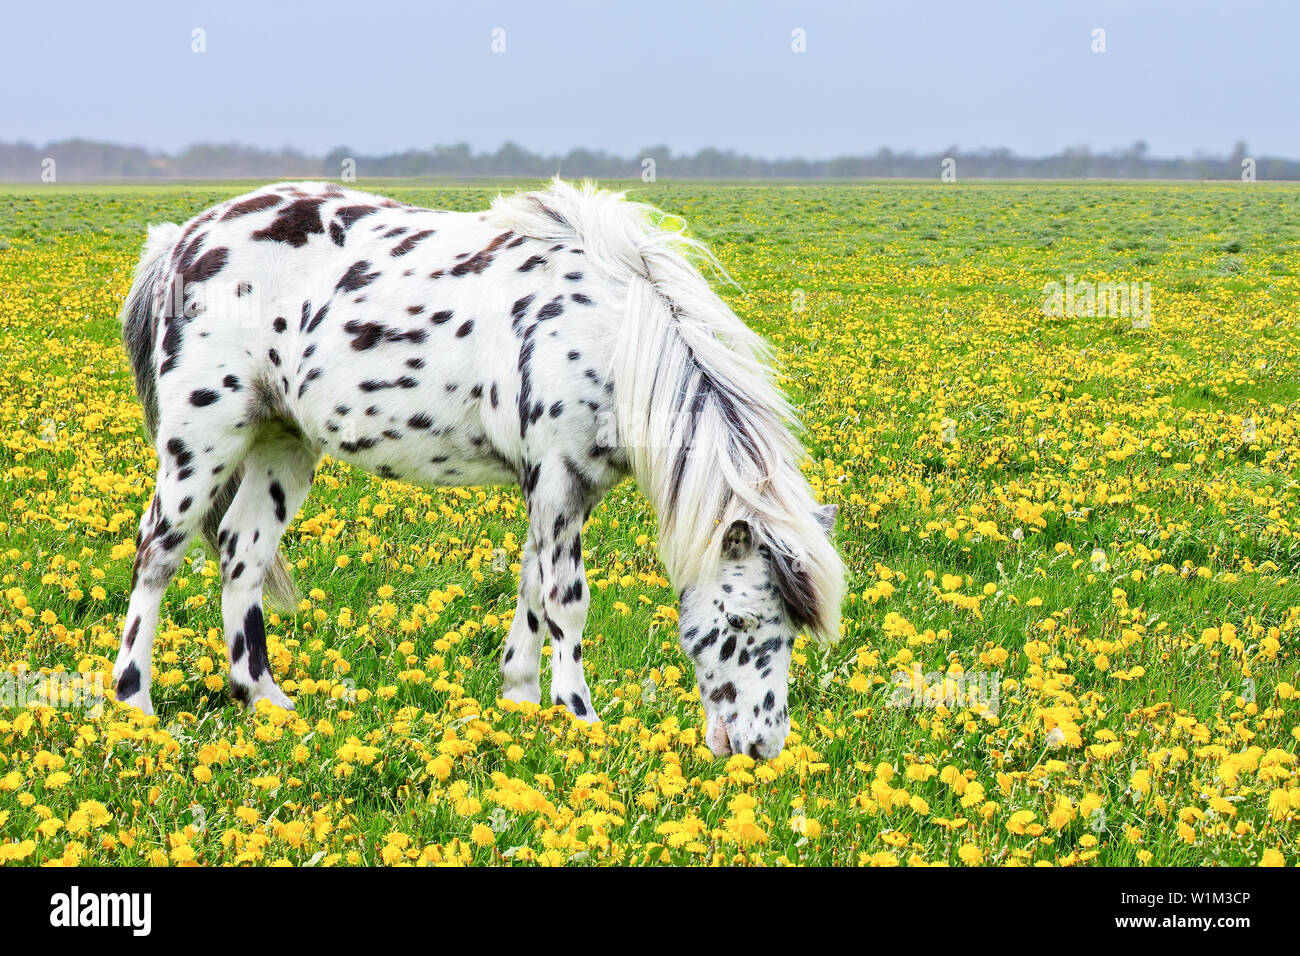 Spotted horse grazing in pasture with yellow dandelions Stock Photo